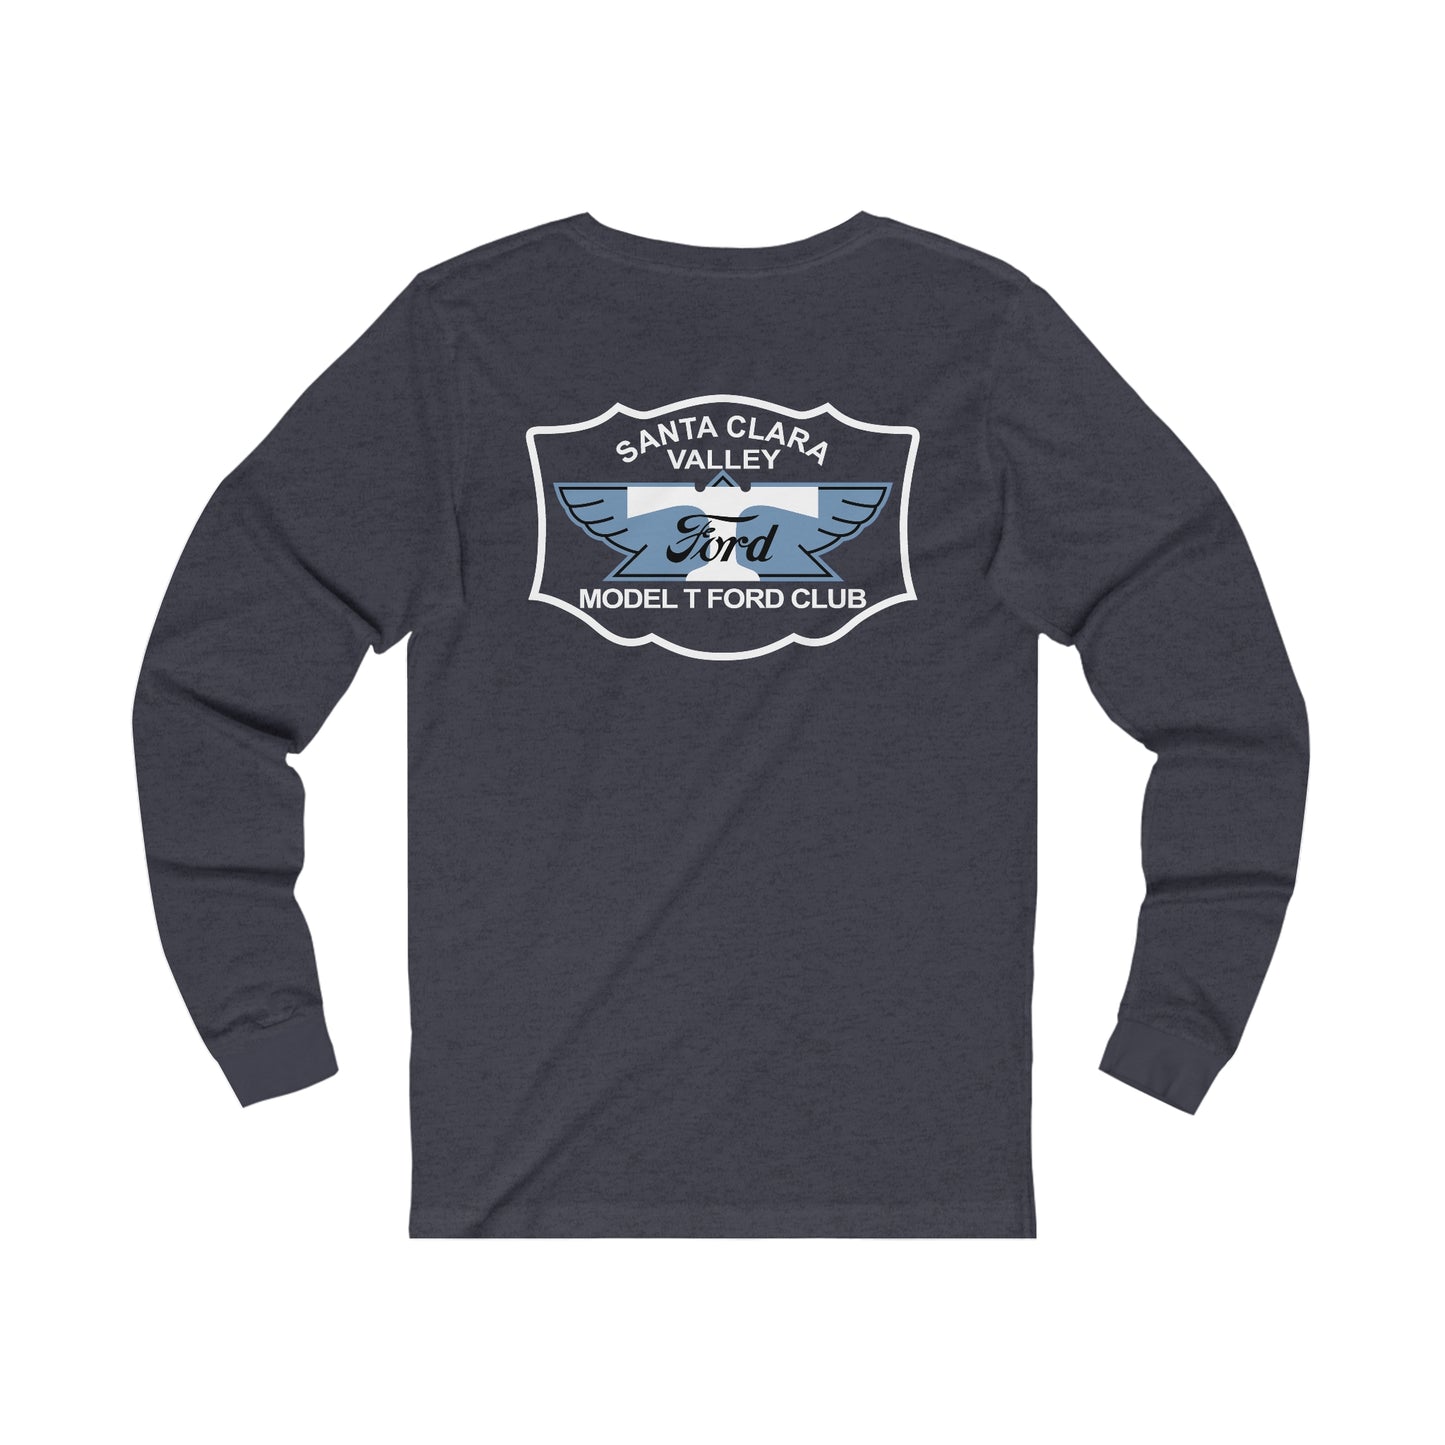 Santa Clara Valley Model T Ford Club (front and back print) Unisex Jersey Long Sleeve Tee